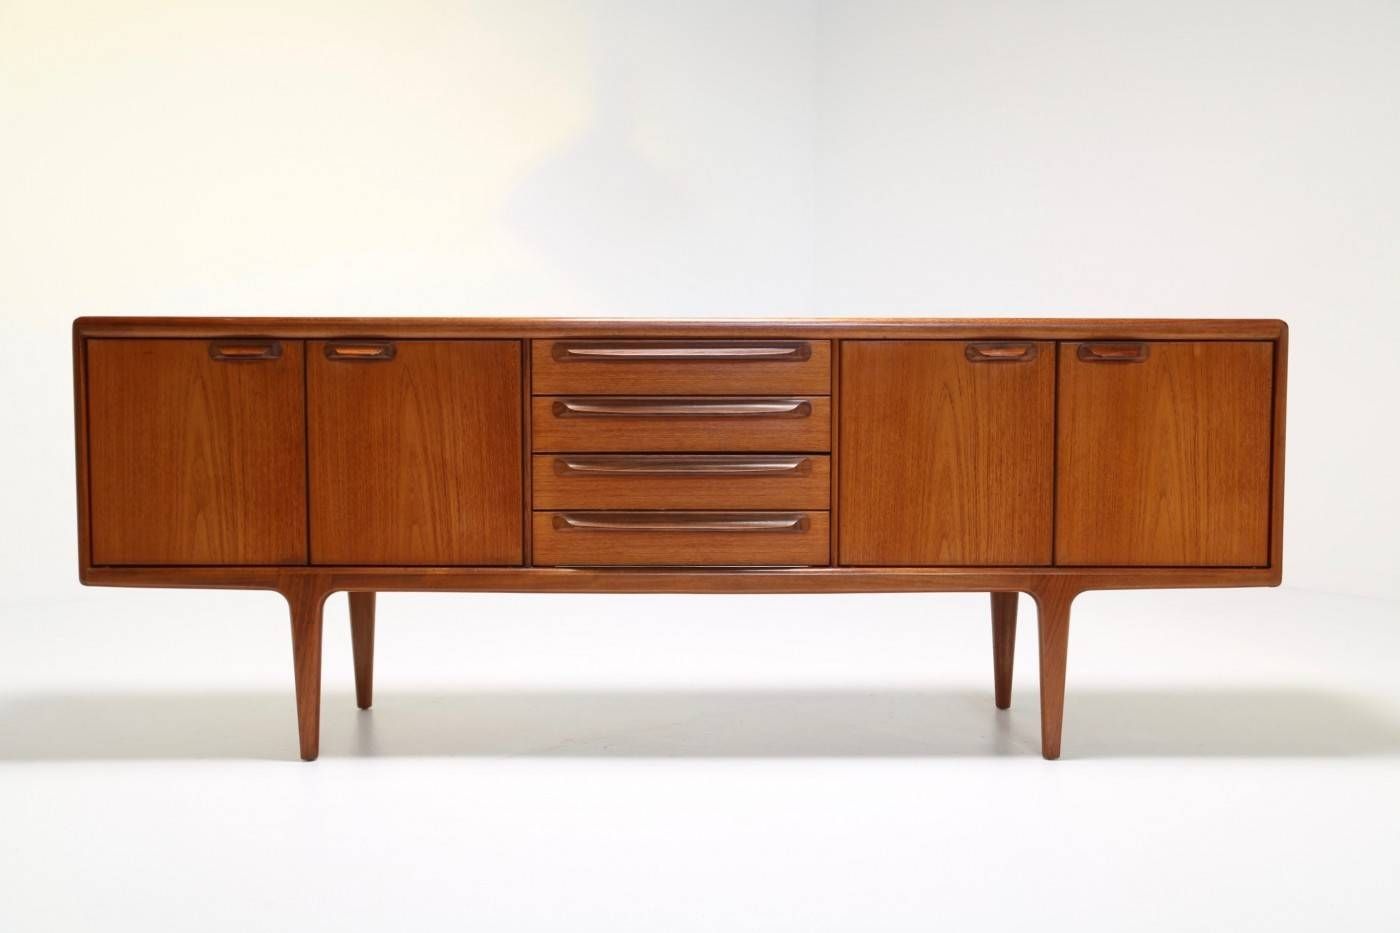 Sideboard: Design A Younger Sideboard Furniture Credenzas For Sale Throughout A Younger Sideboards (View 4 of 15)